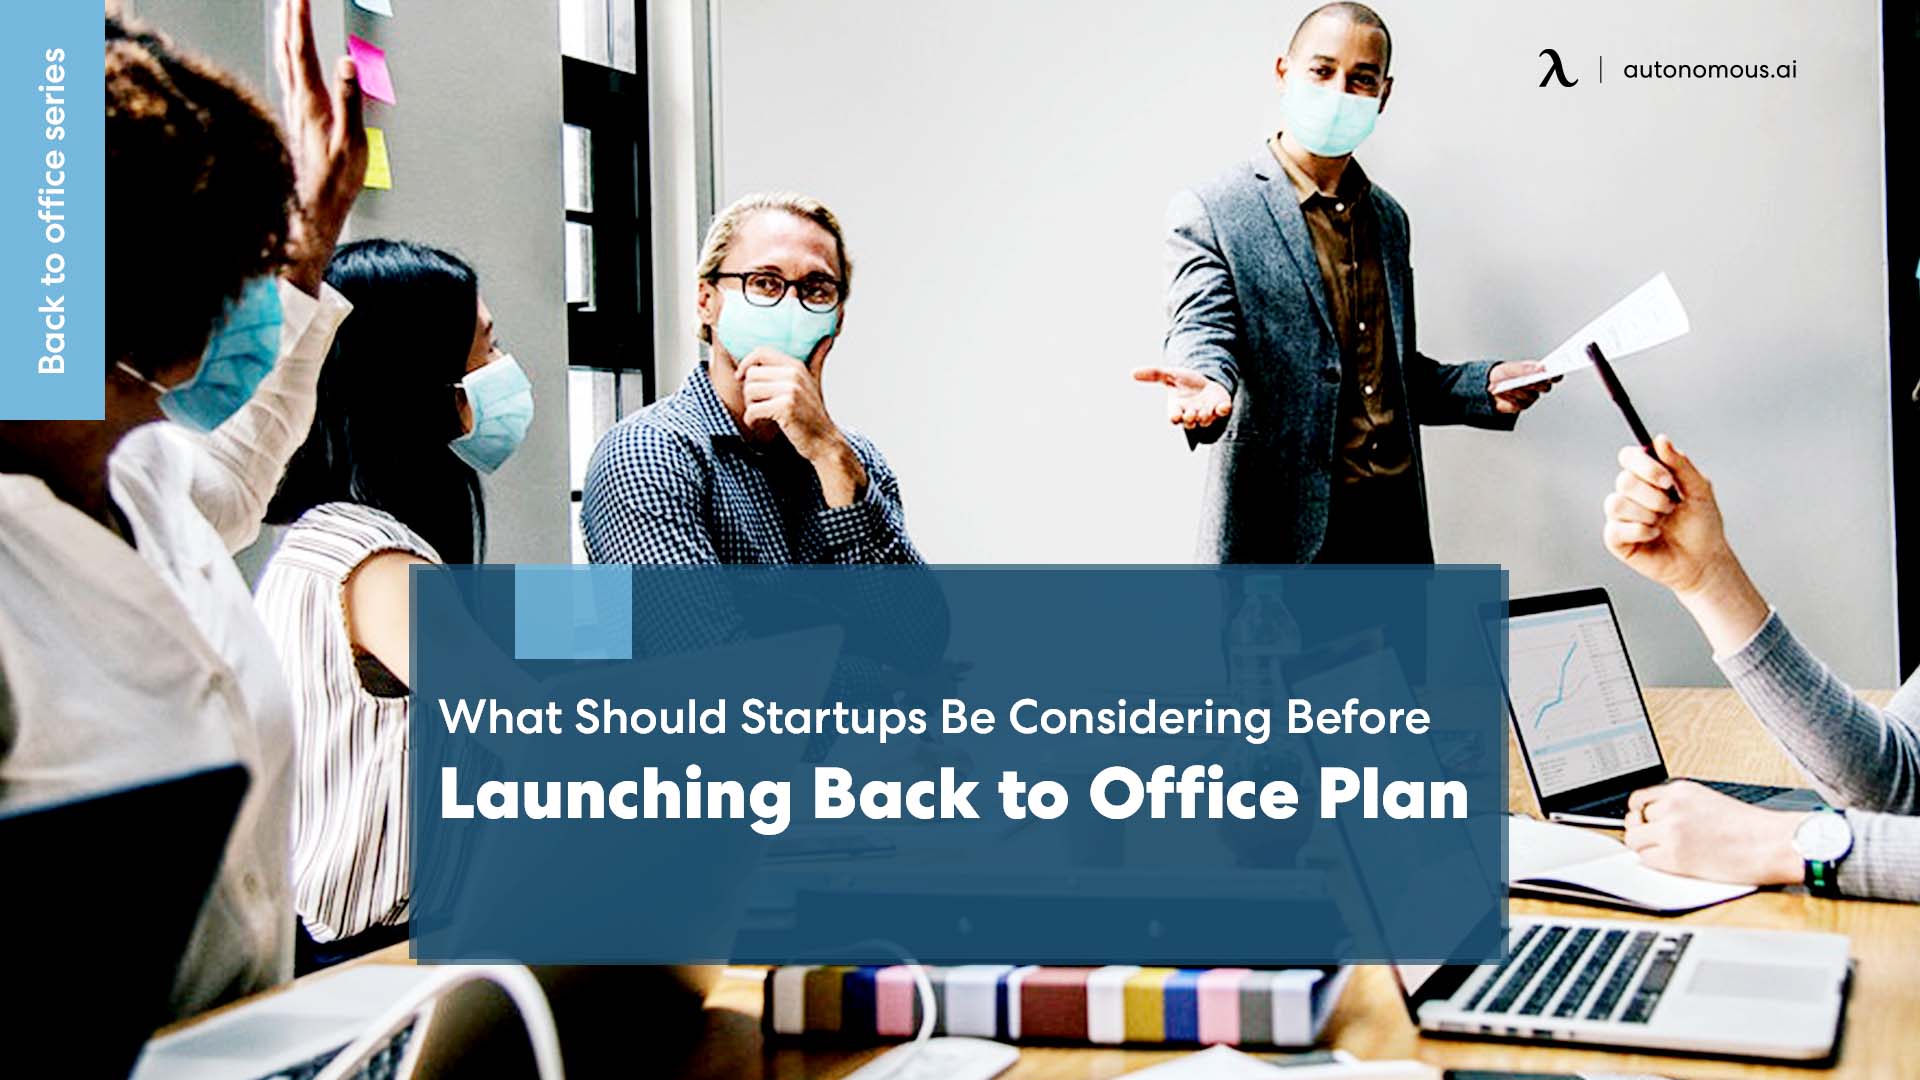 What Should Startups Be Considering Before Launching Their Back to Office Plan?